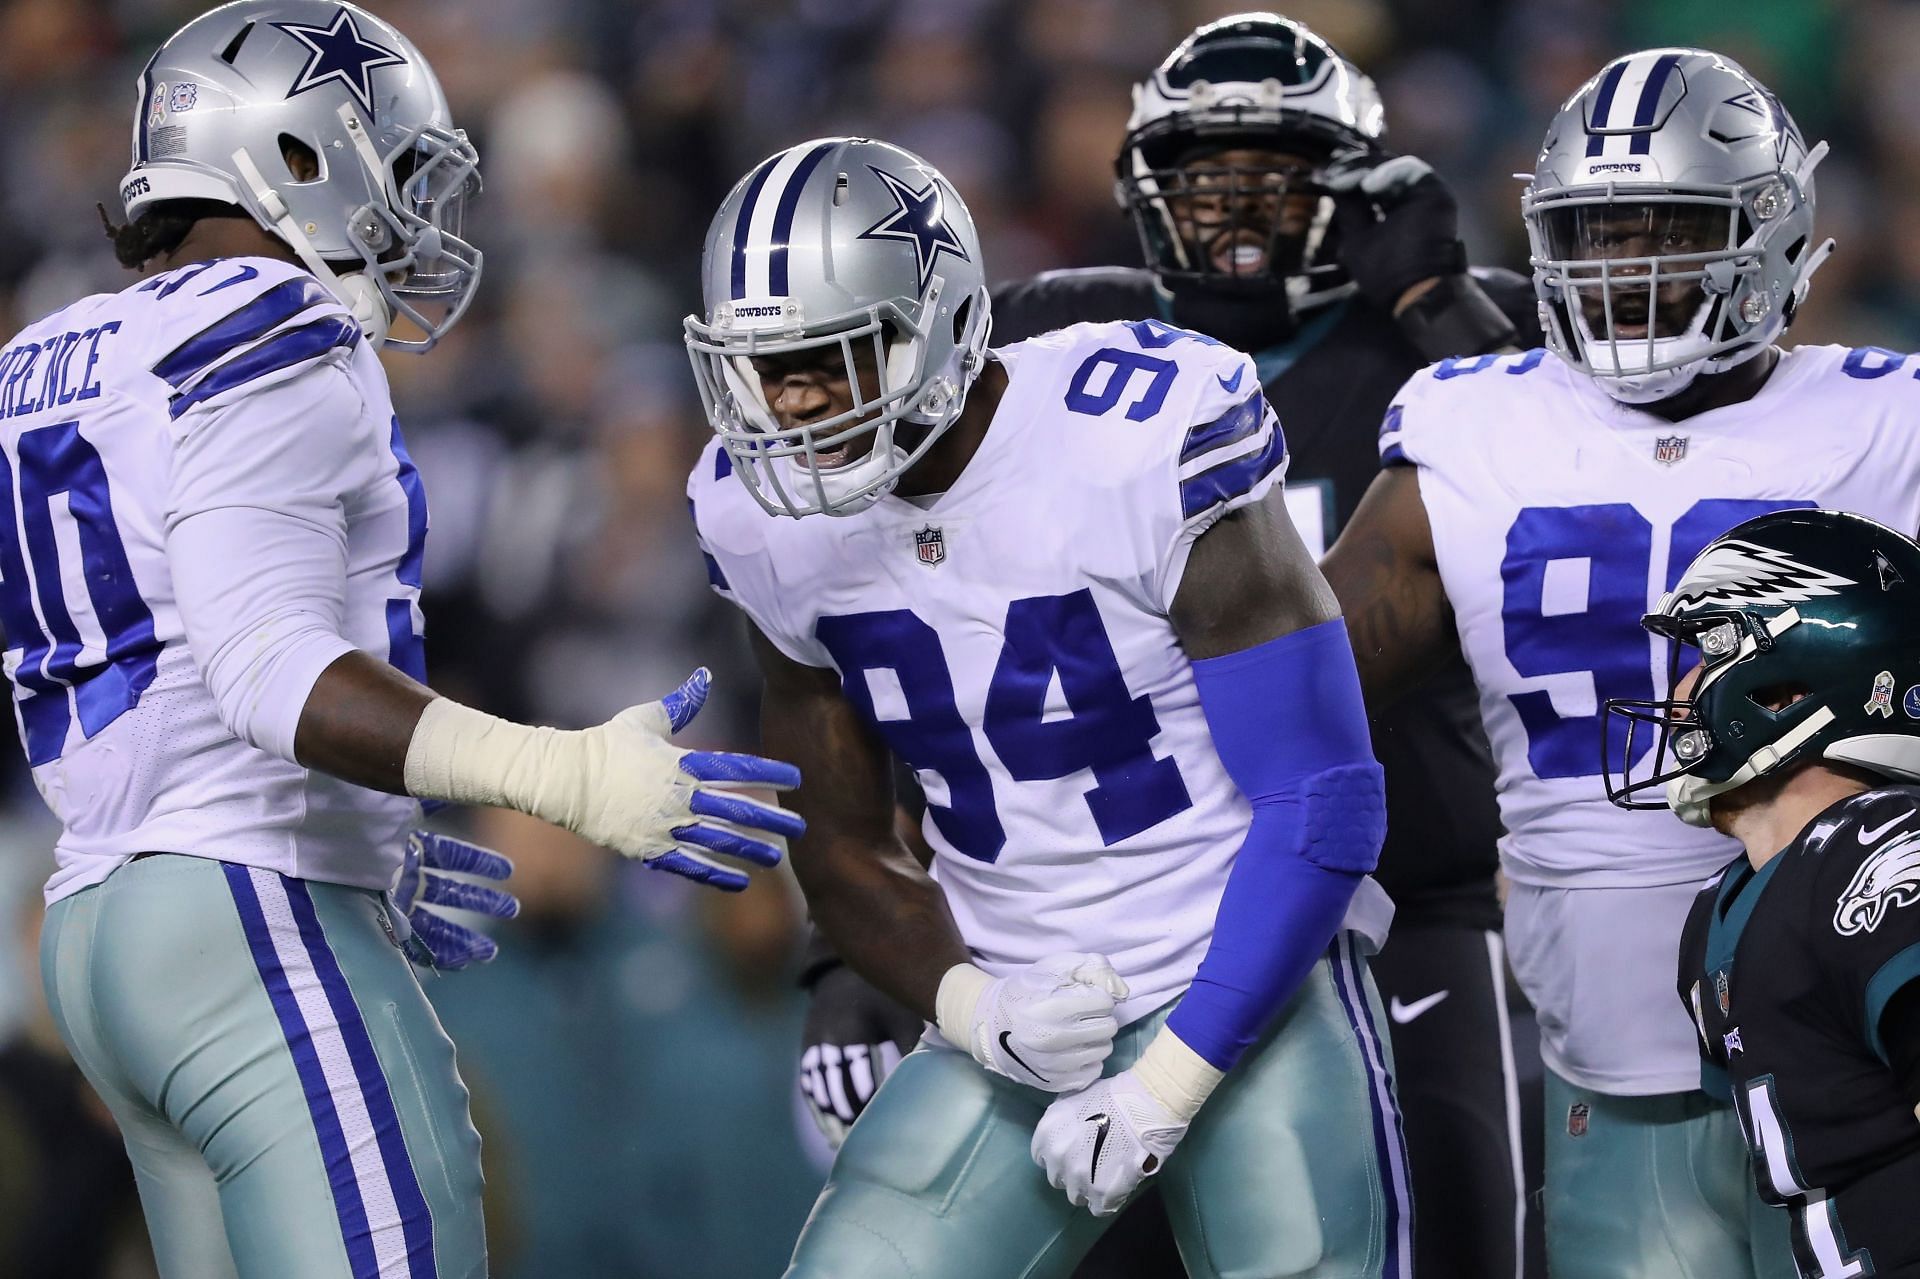 Randy Gregory took a potshot at his former employer through Twitter